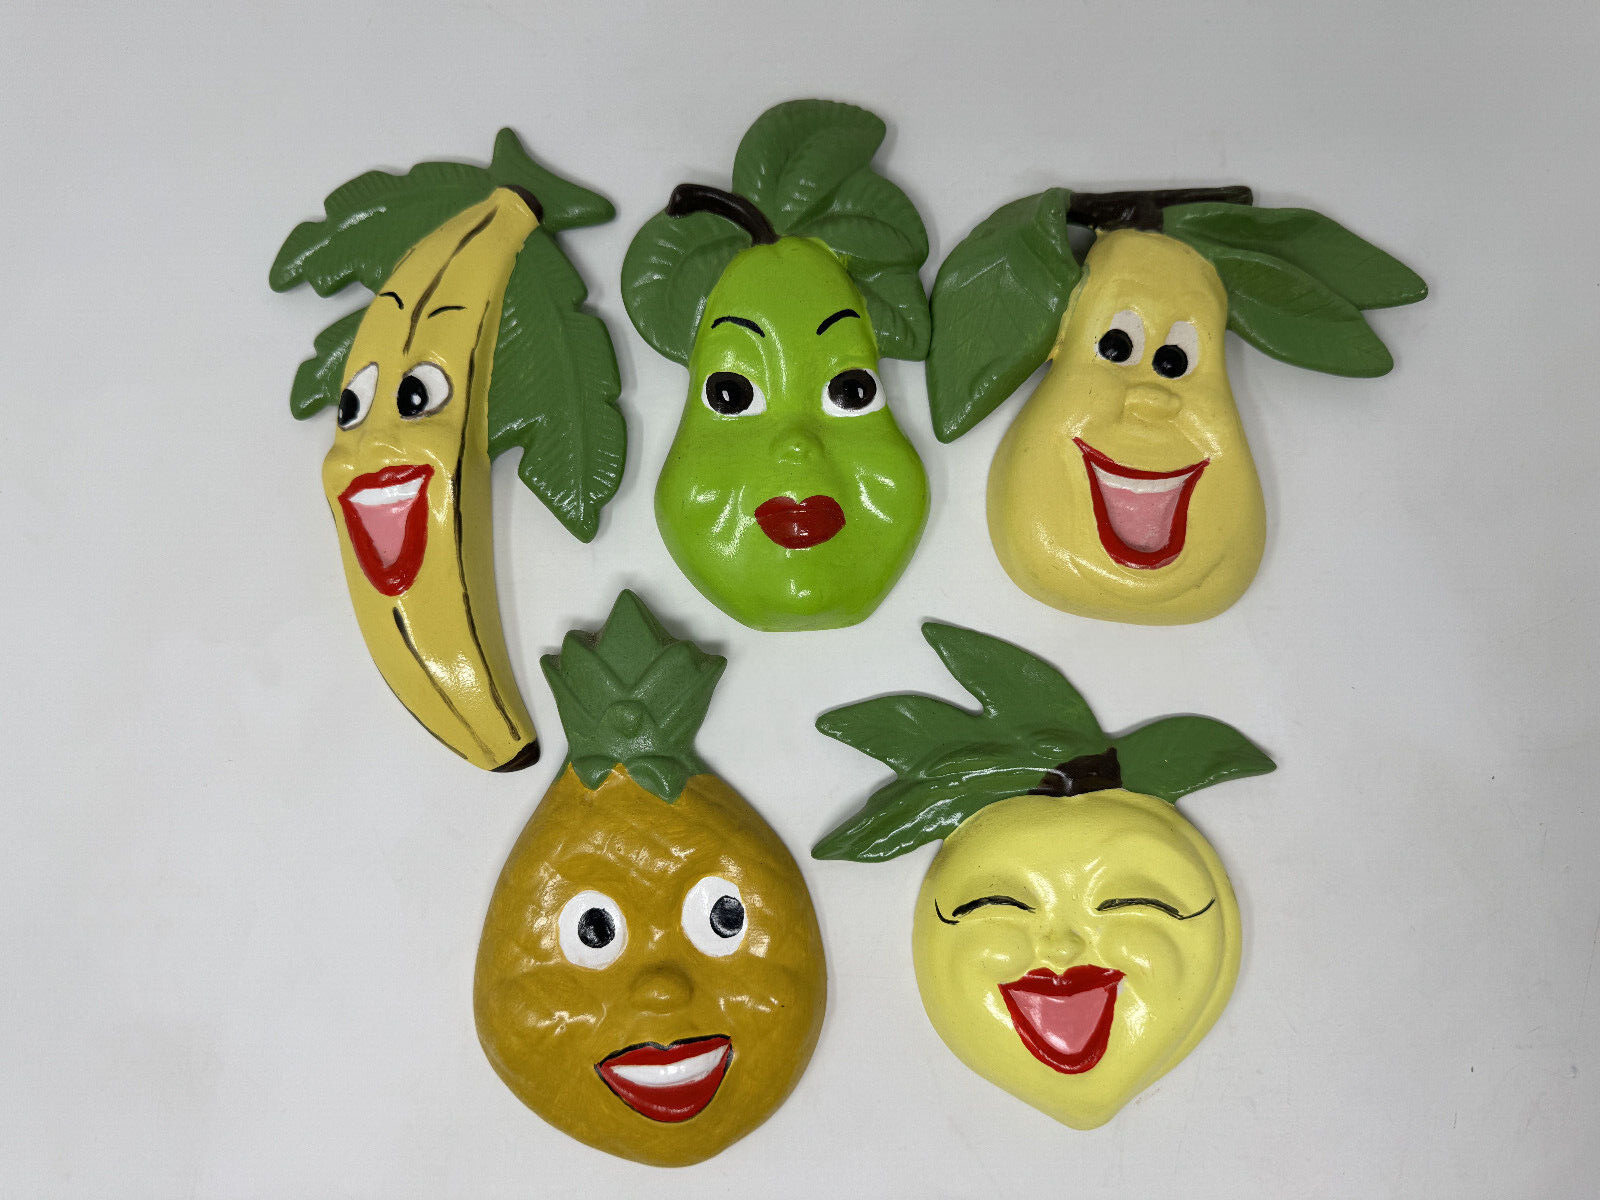 Lot of 5 Vintage Ceramic Anthropomorphic Fruit Wall Hanging Plaques